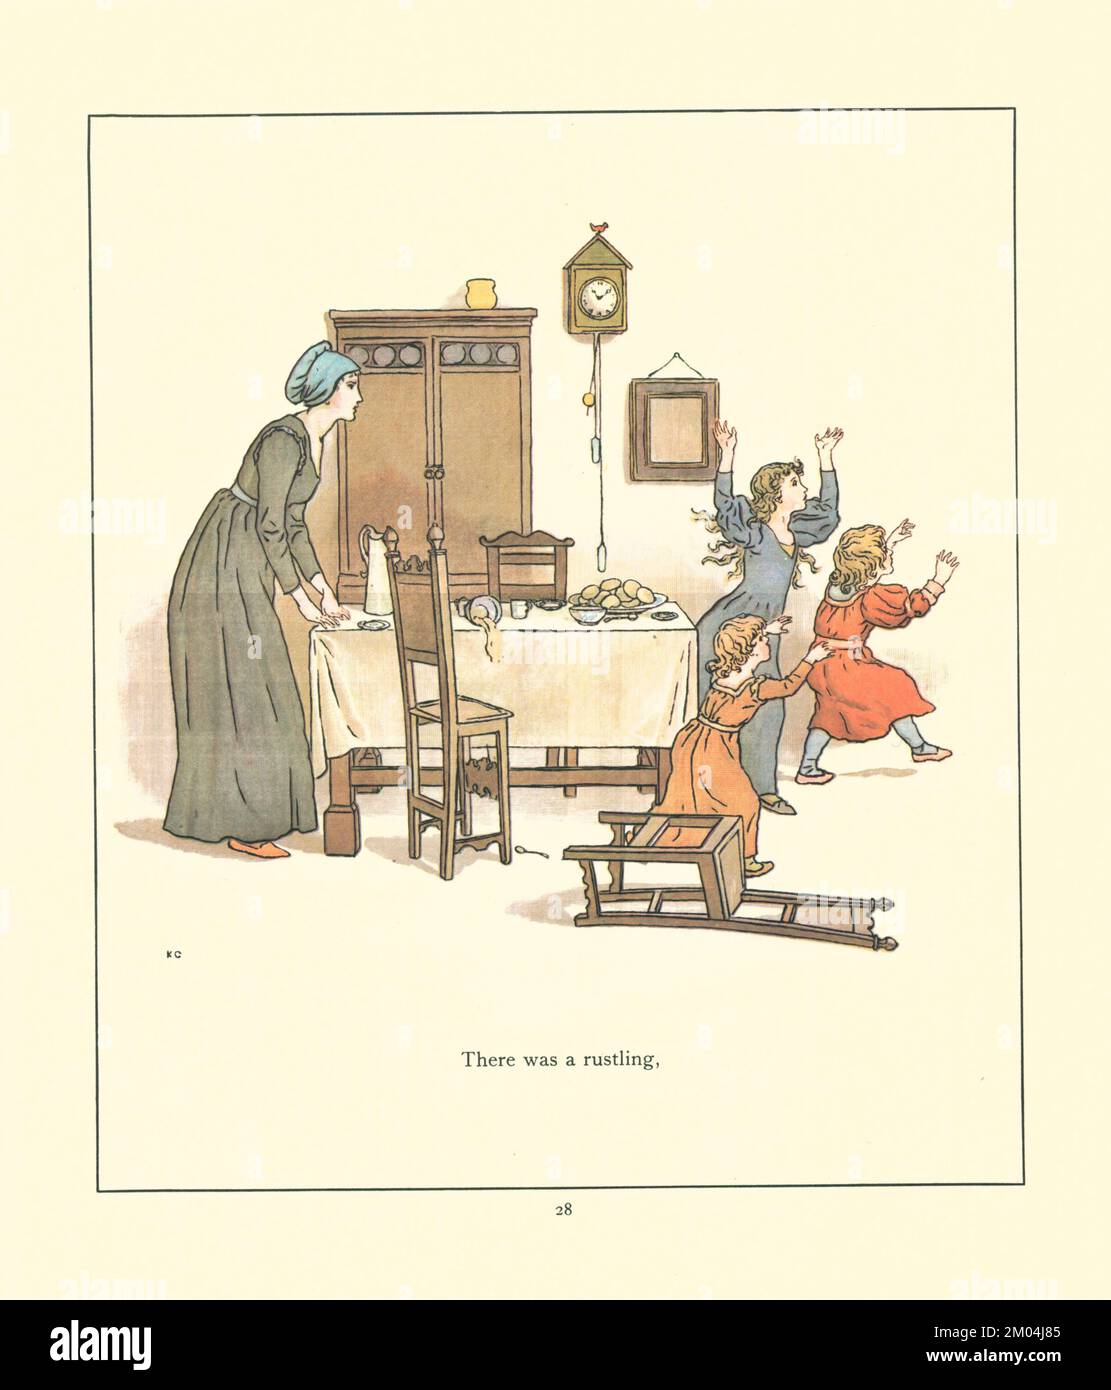 There was a rustling Illustrated by KATE GREENAWAY (1846-1901) English artist and writer. for The Pied Piper of Hamelin by Robert Browning, 1812-1889 Published by Warne in 1910 Stock Photo